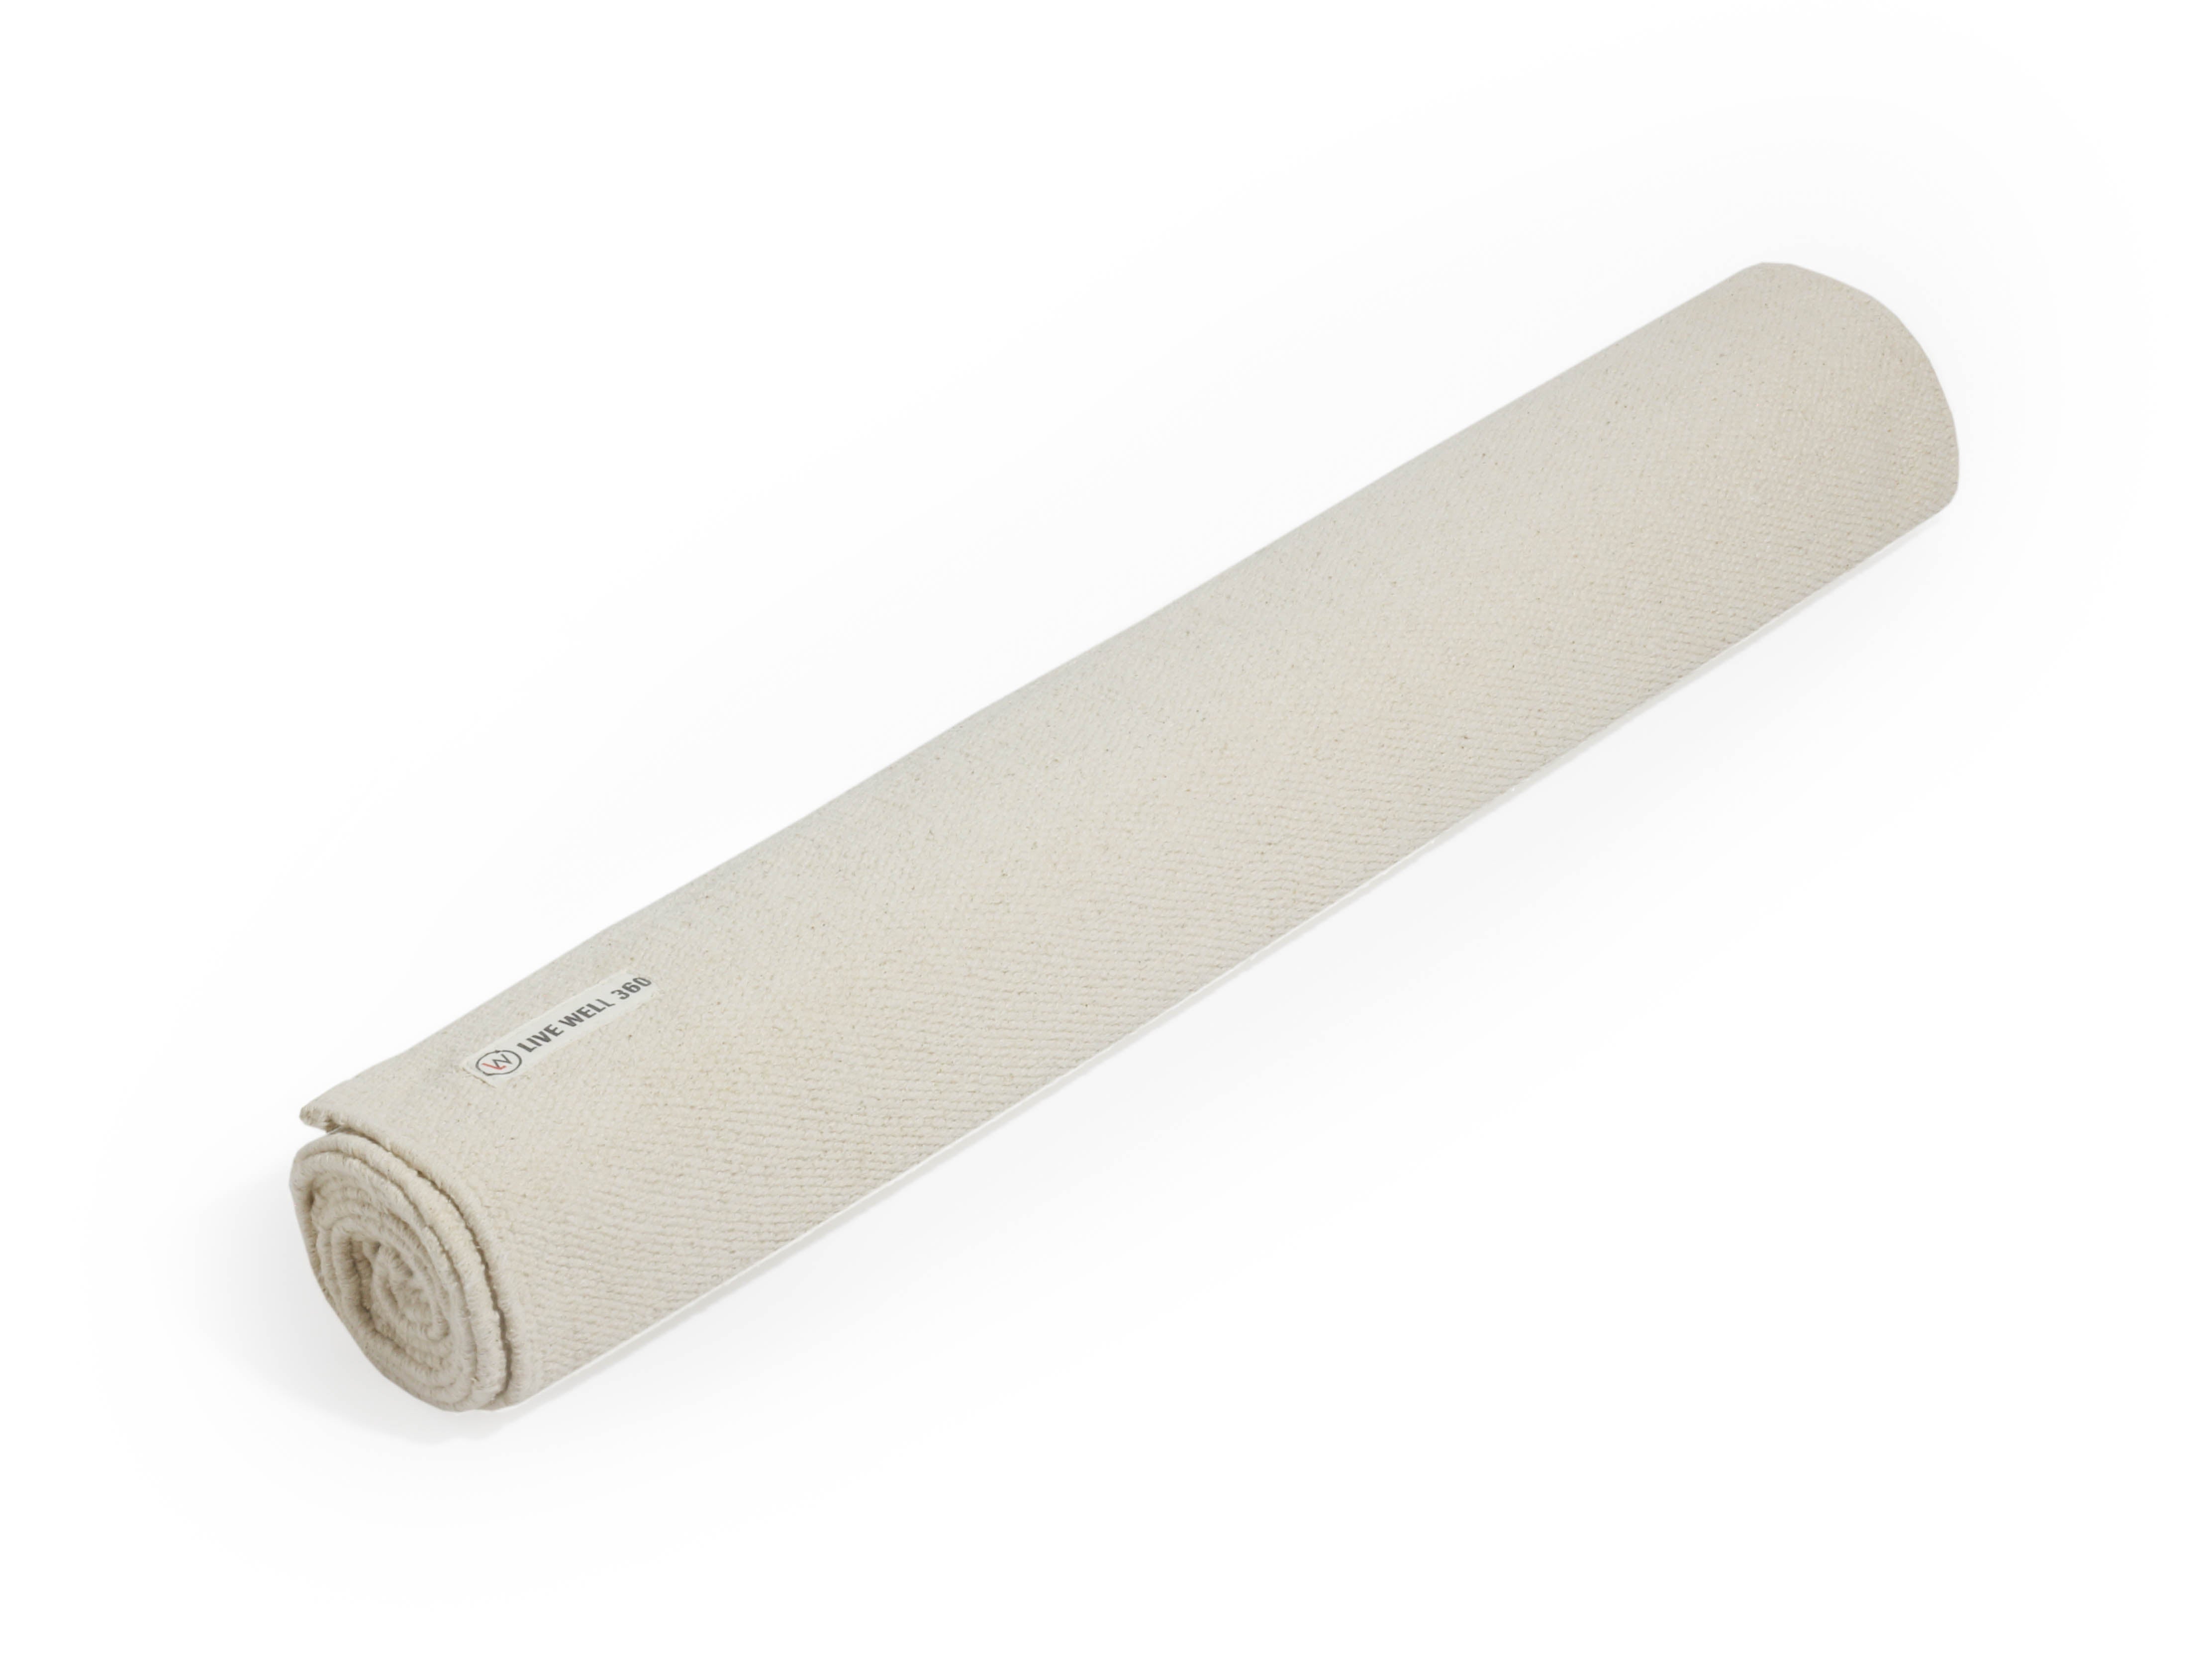  Handmade Organic Cotton Yoga Mat by Live Well 360 - Natural  Yoga Mat - Exercise, Workout, & Fitness Rug Made of 100% Cotton - Woven  Material - Hand-Crafted, Absorbent 